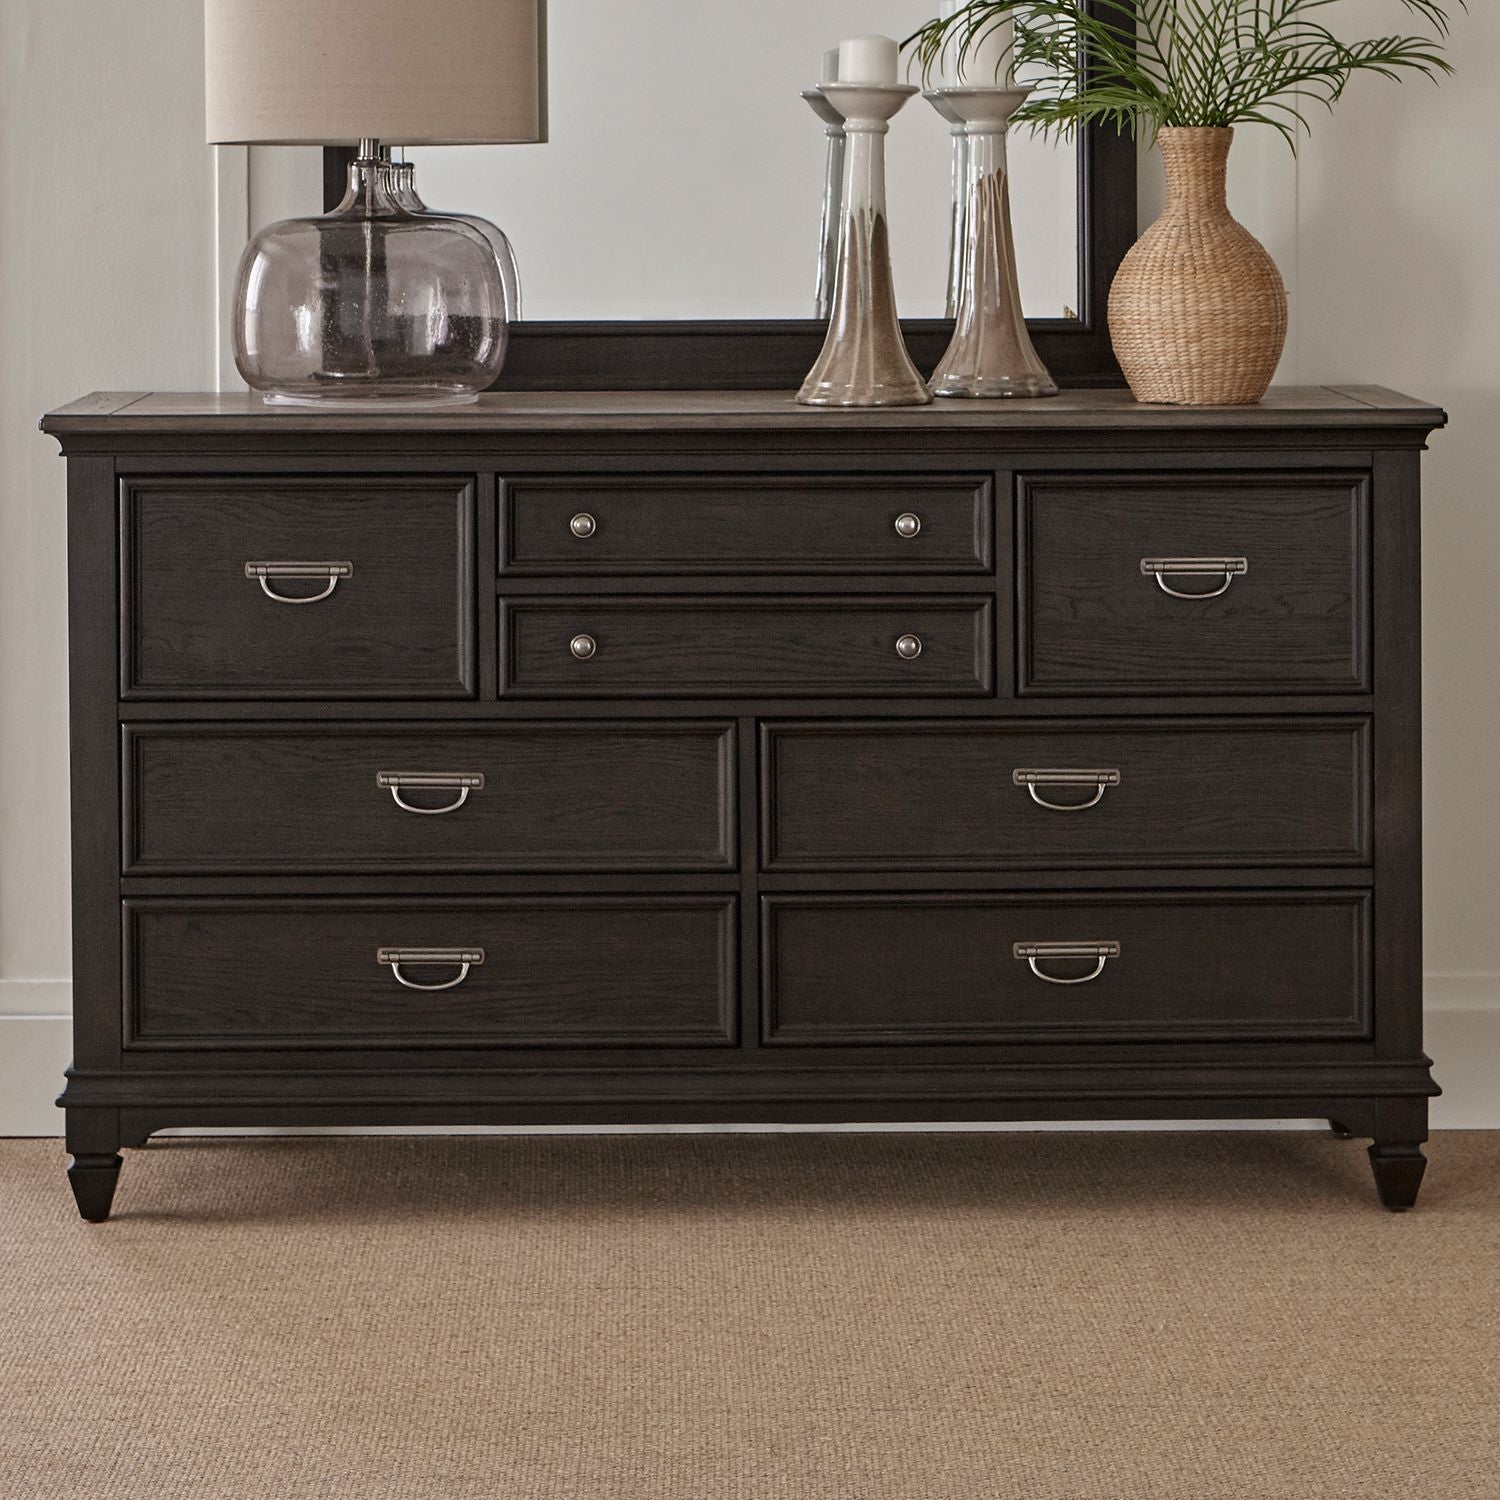 Allyson Park 417B-BR Black Panel Bedroom Collection from Liberty Furniture